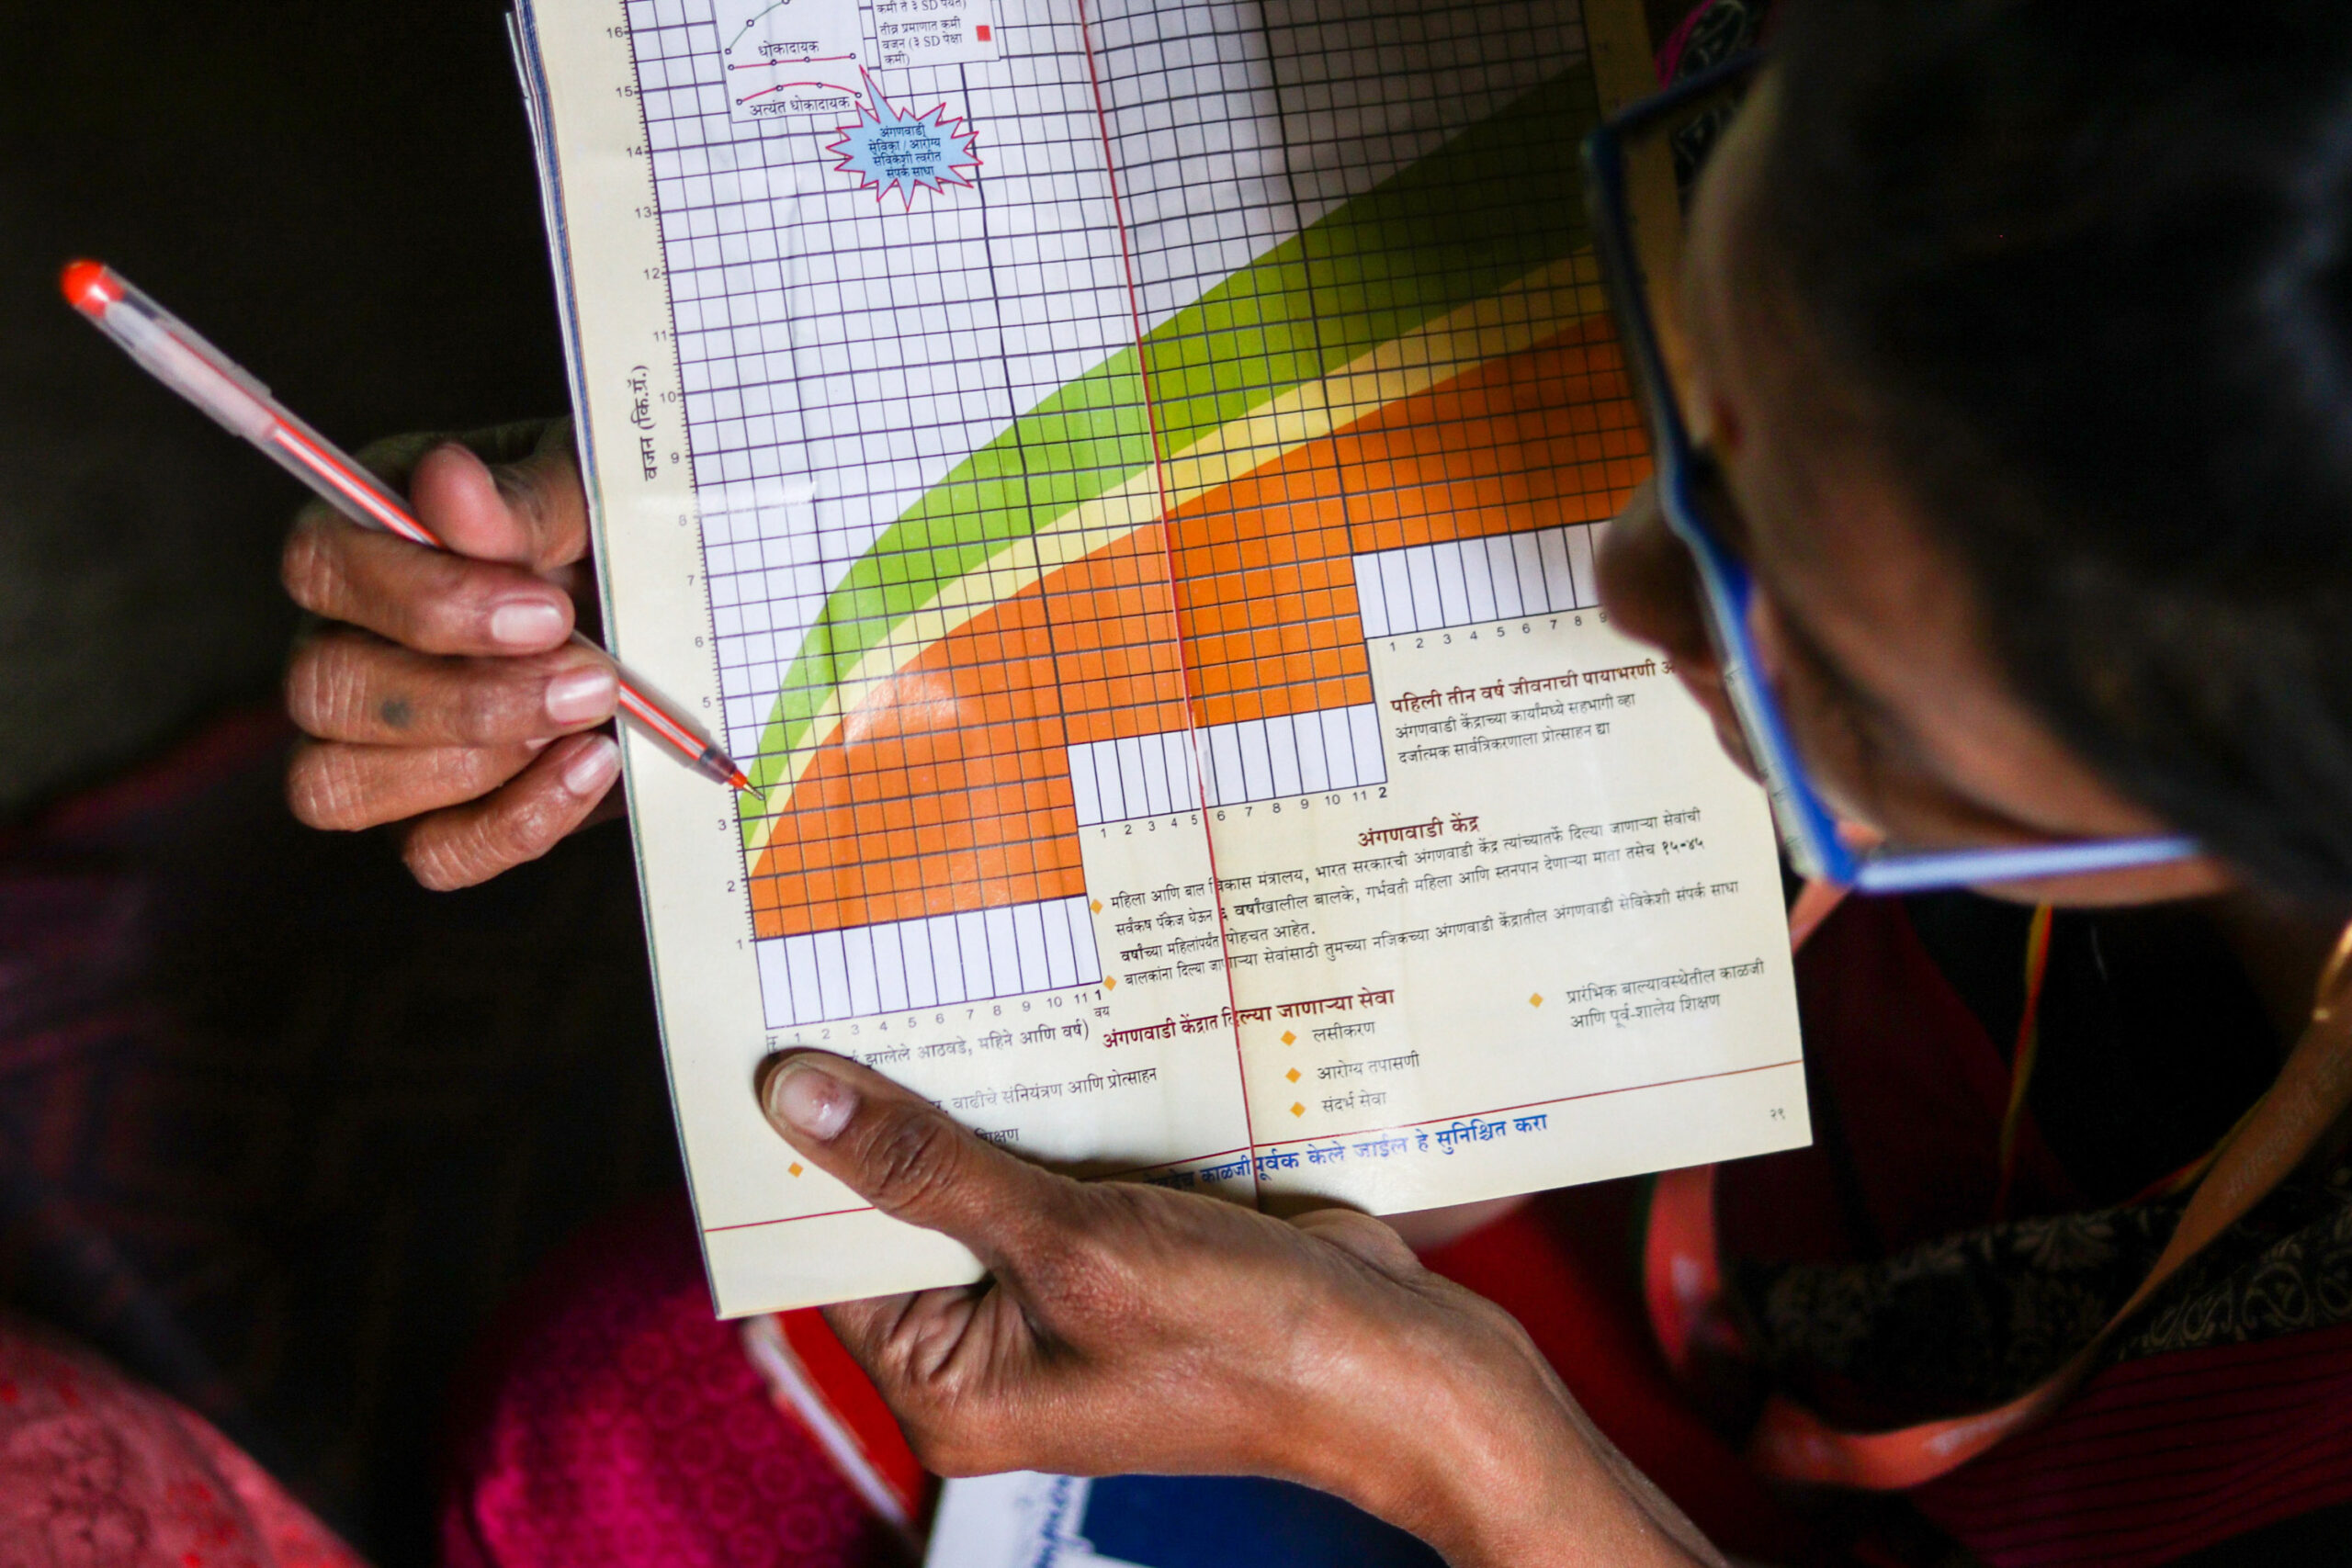 close up of Maya using a pen to point at infant mortality statistics on a leaflet